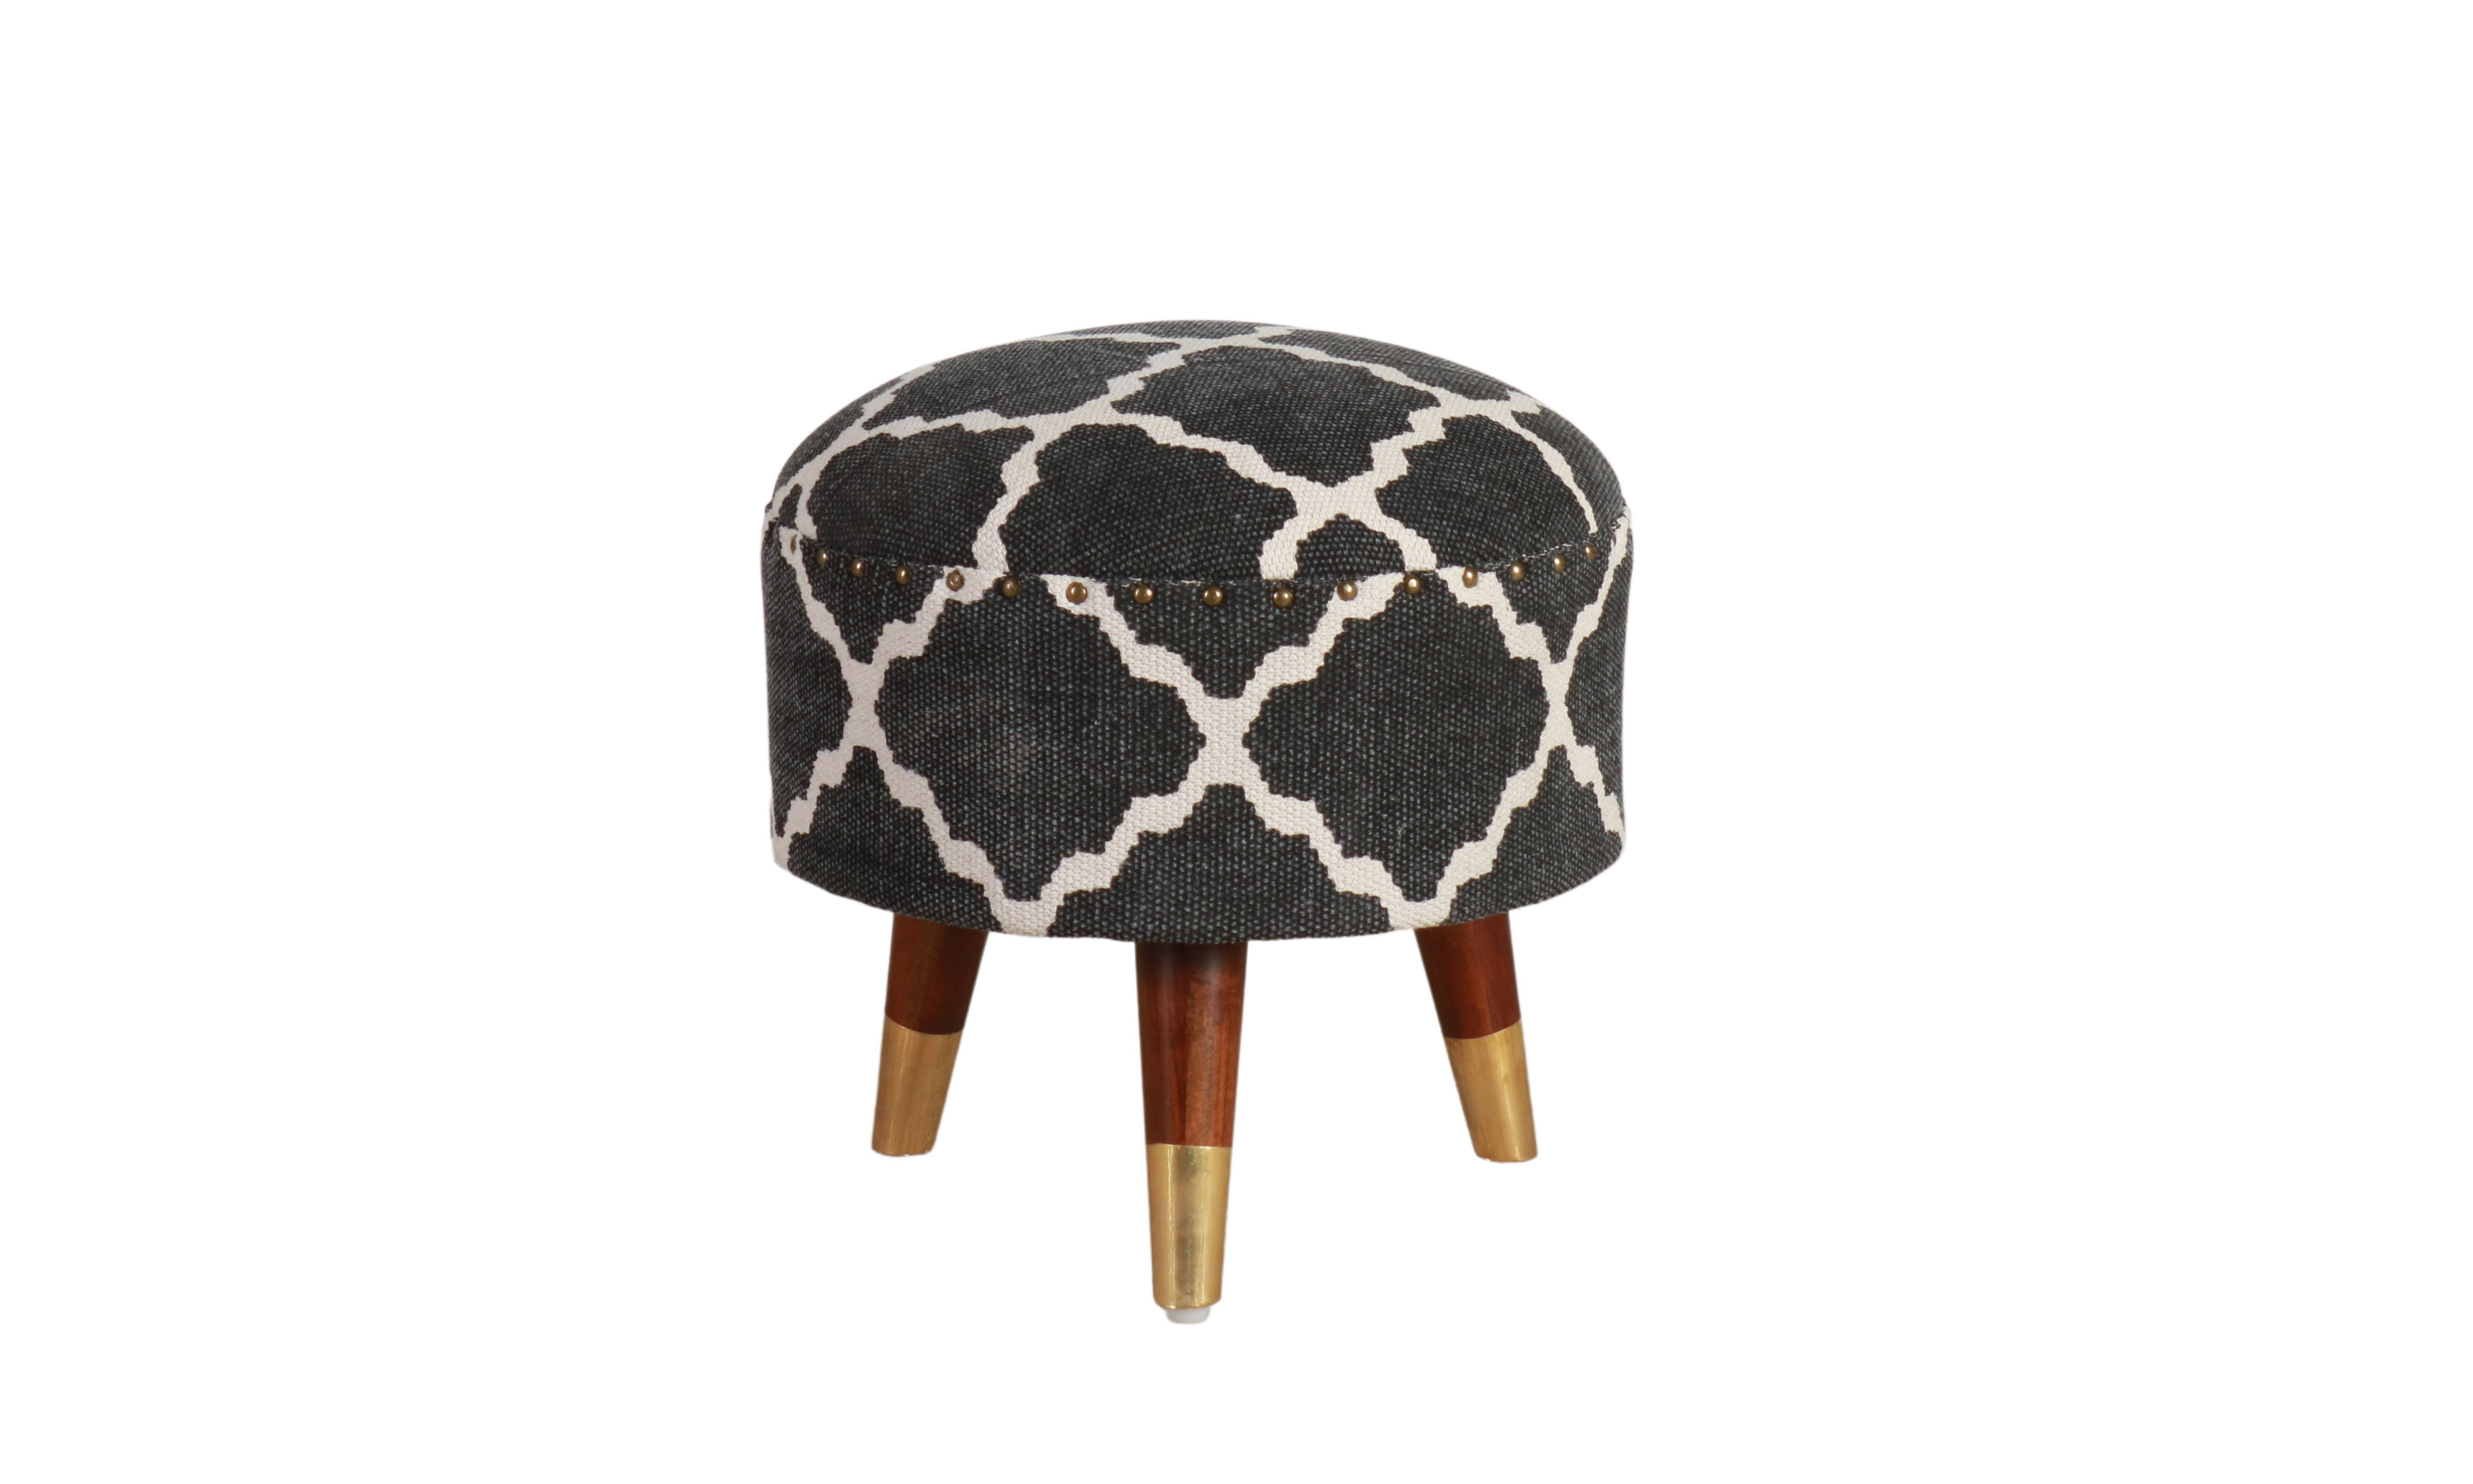 Block & Chisel round black and white print cotton upholstered stool